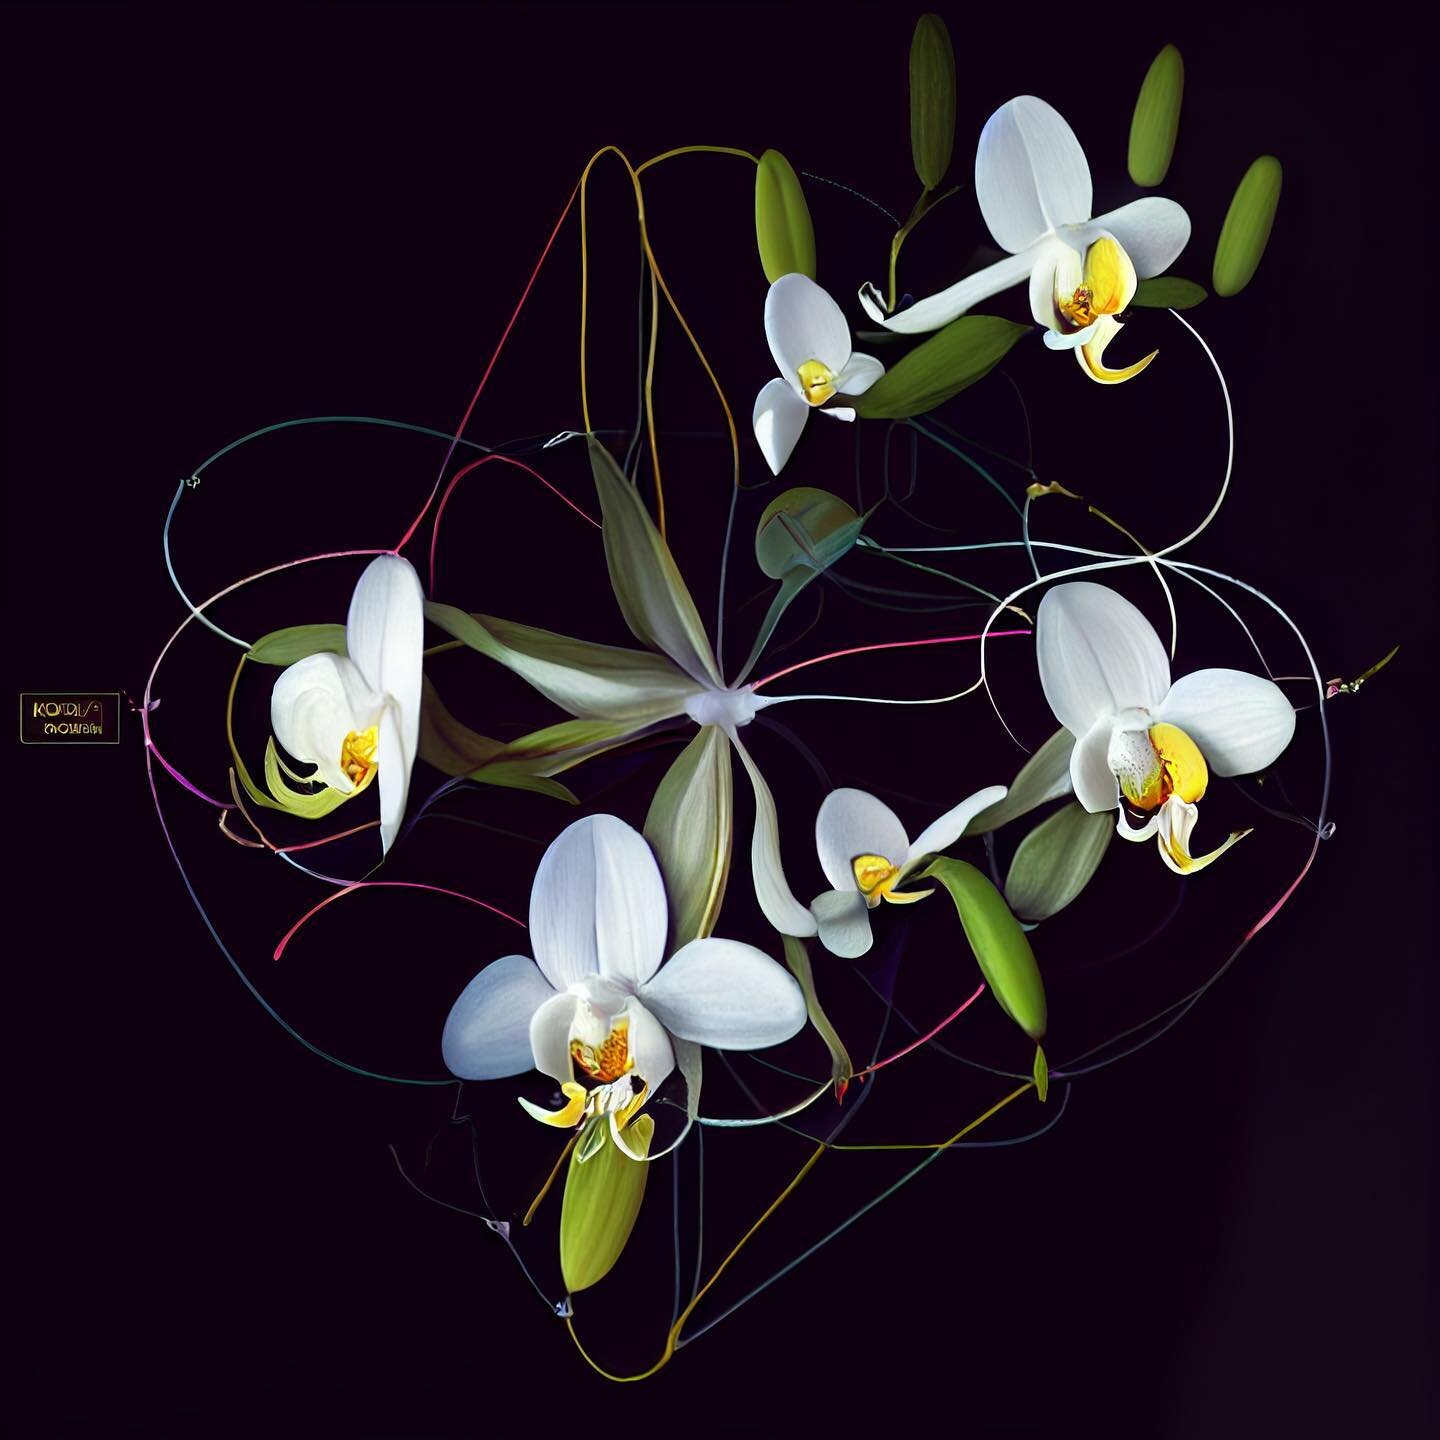 &ldquo;Electric orchids&rdquo;

#mood #generativeart #aiart #animation #graphic #art #artist #dataviz #complexity #glitch #electric #midjourney #digitalart #orchid #flowers